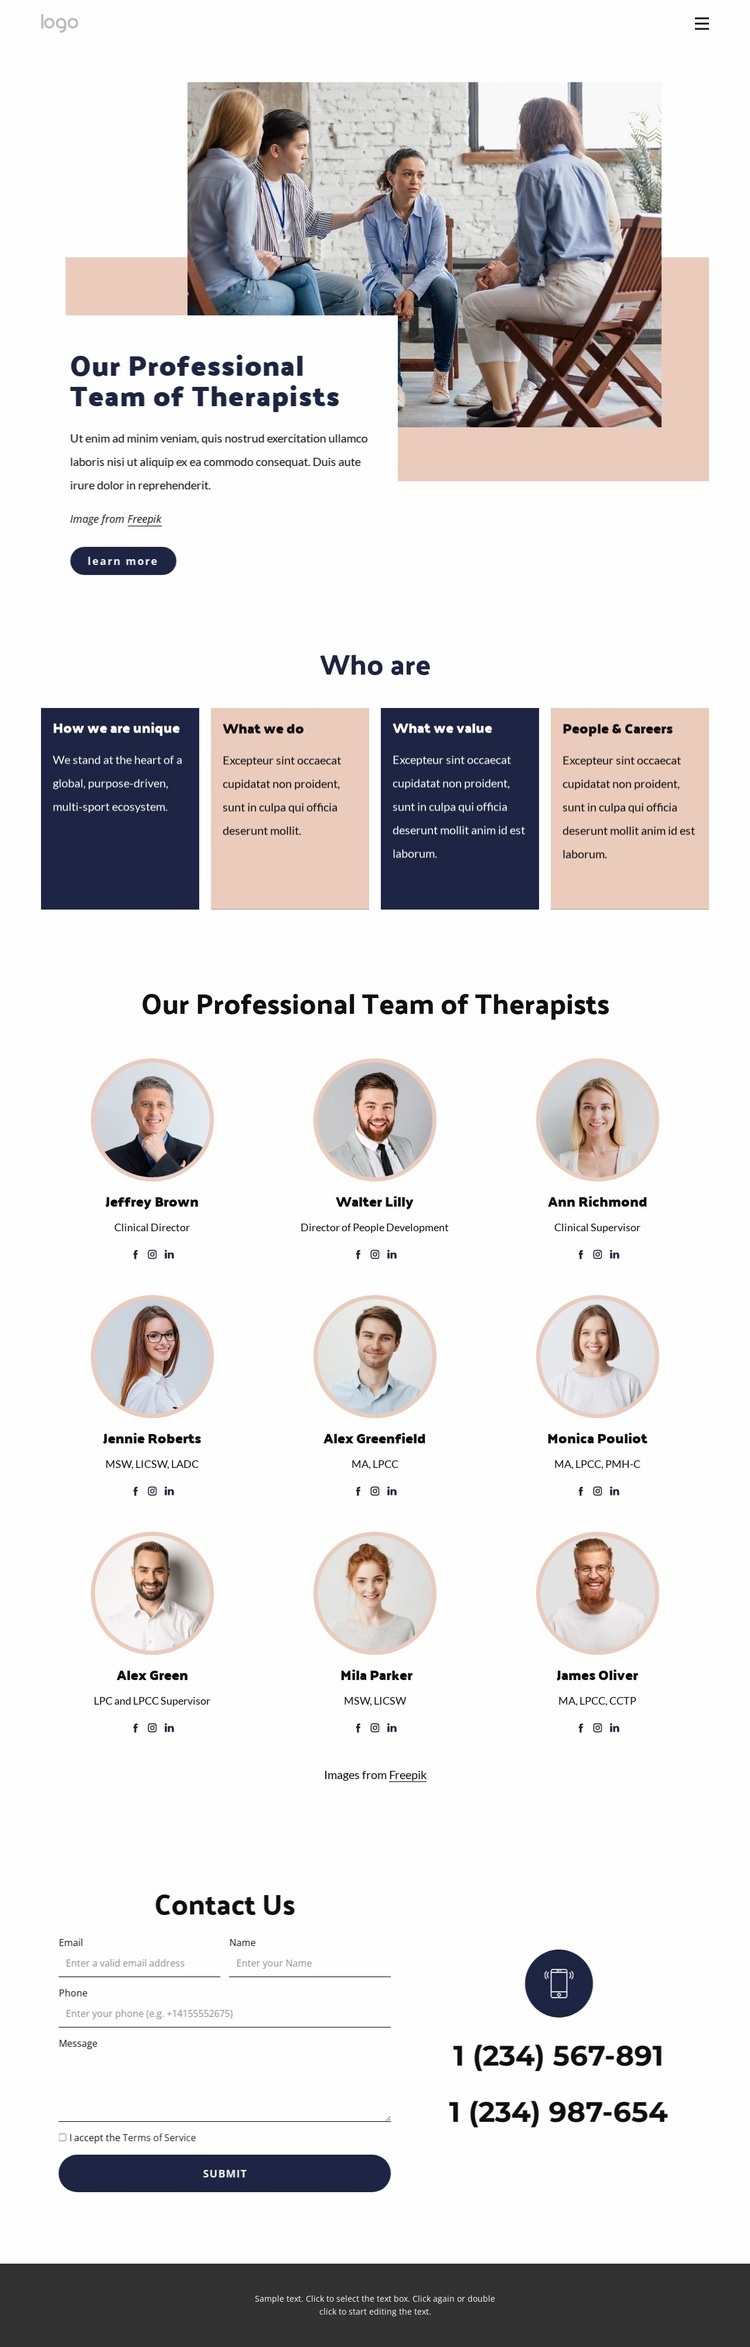 Our professional team of therapists Homepage Design